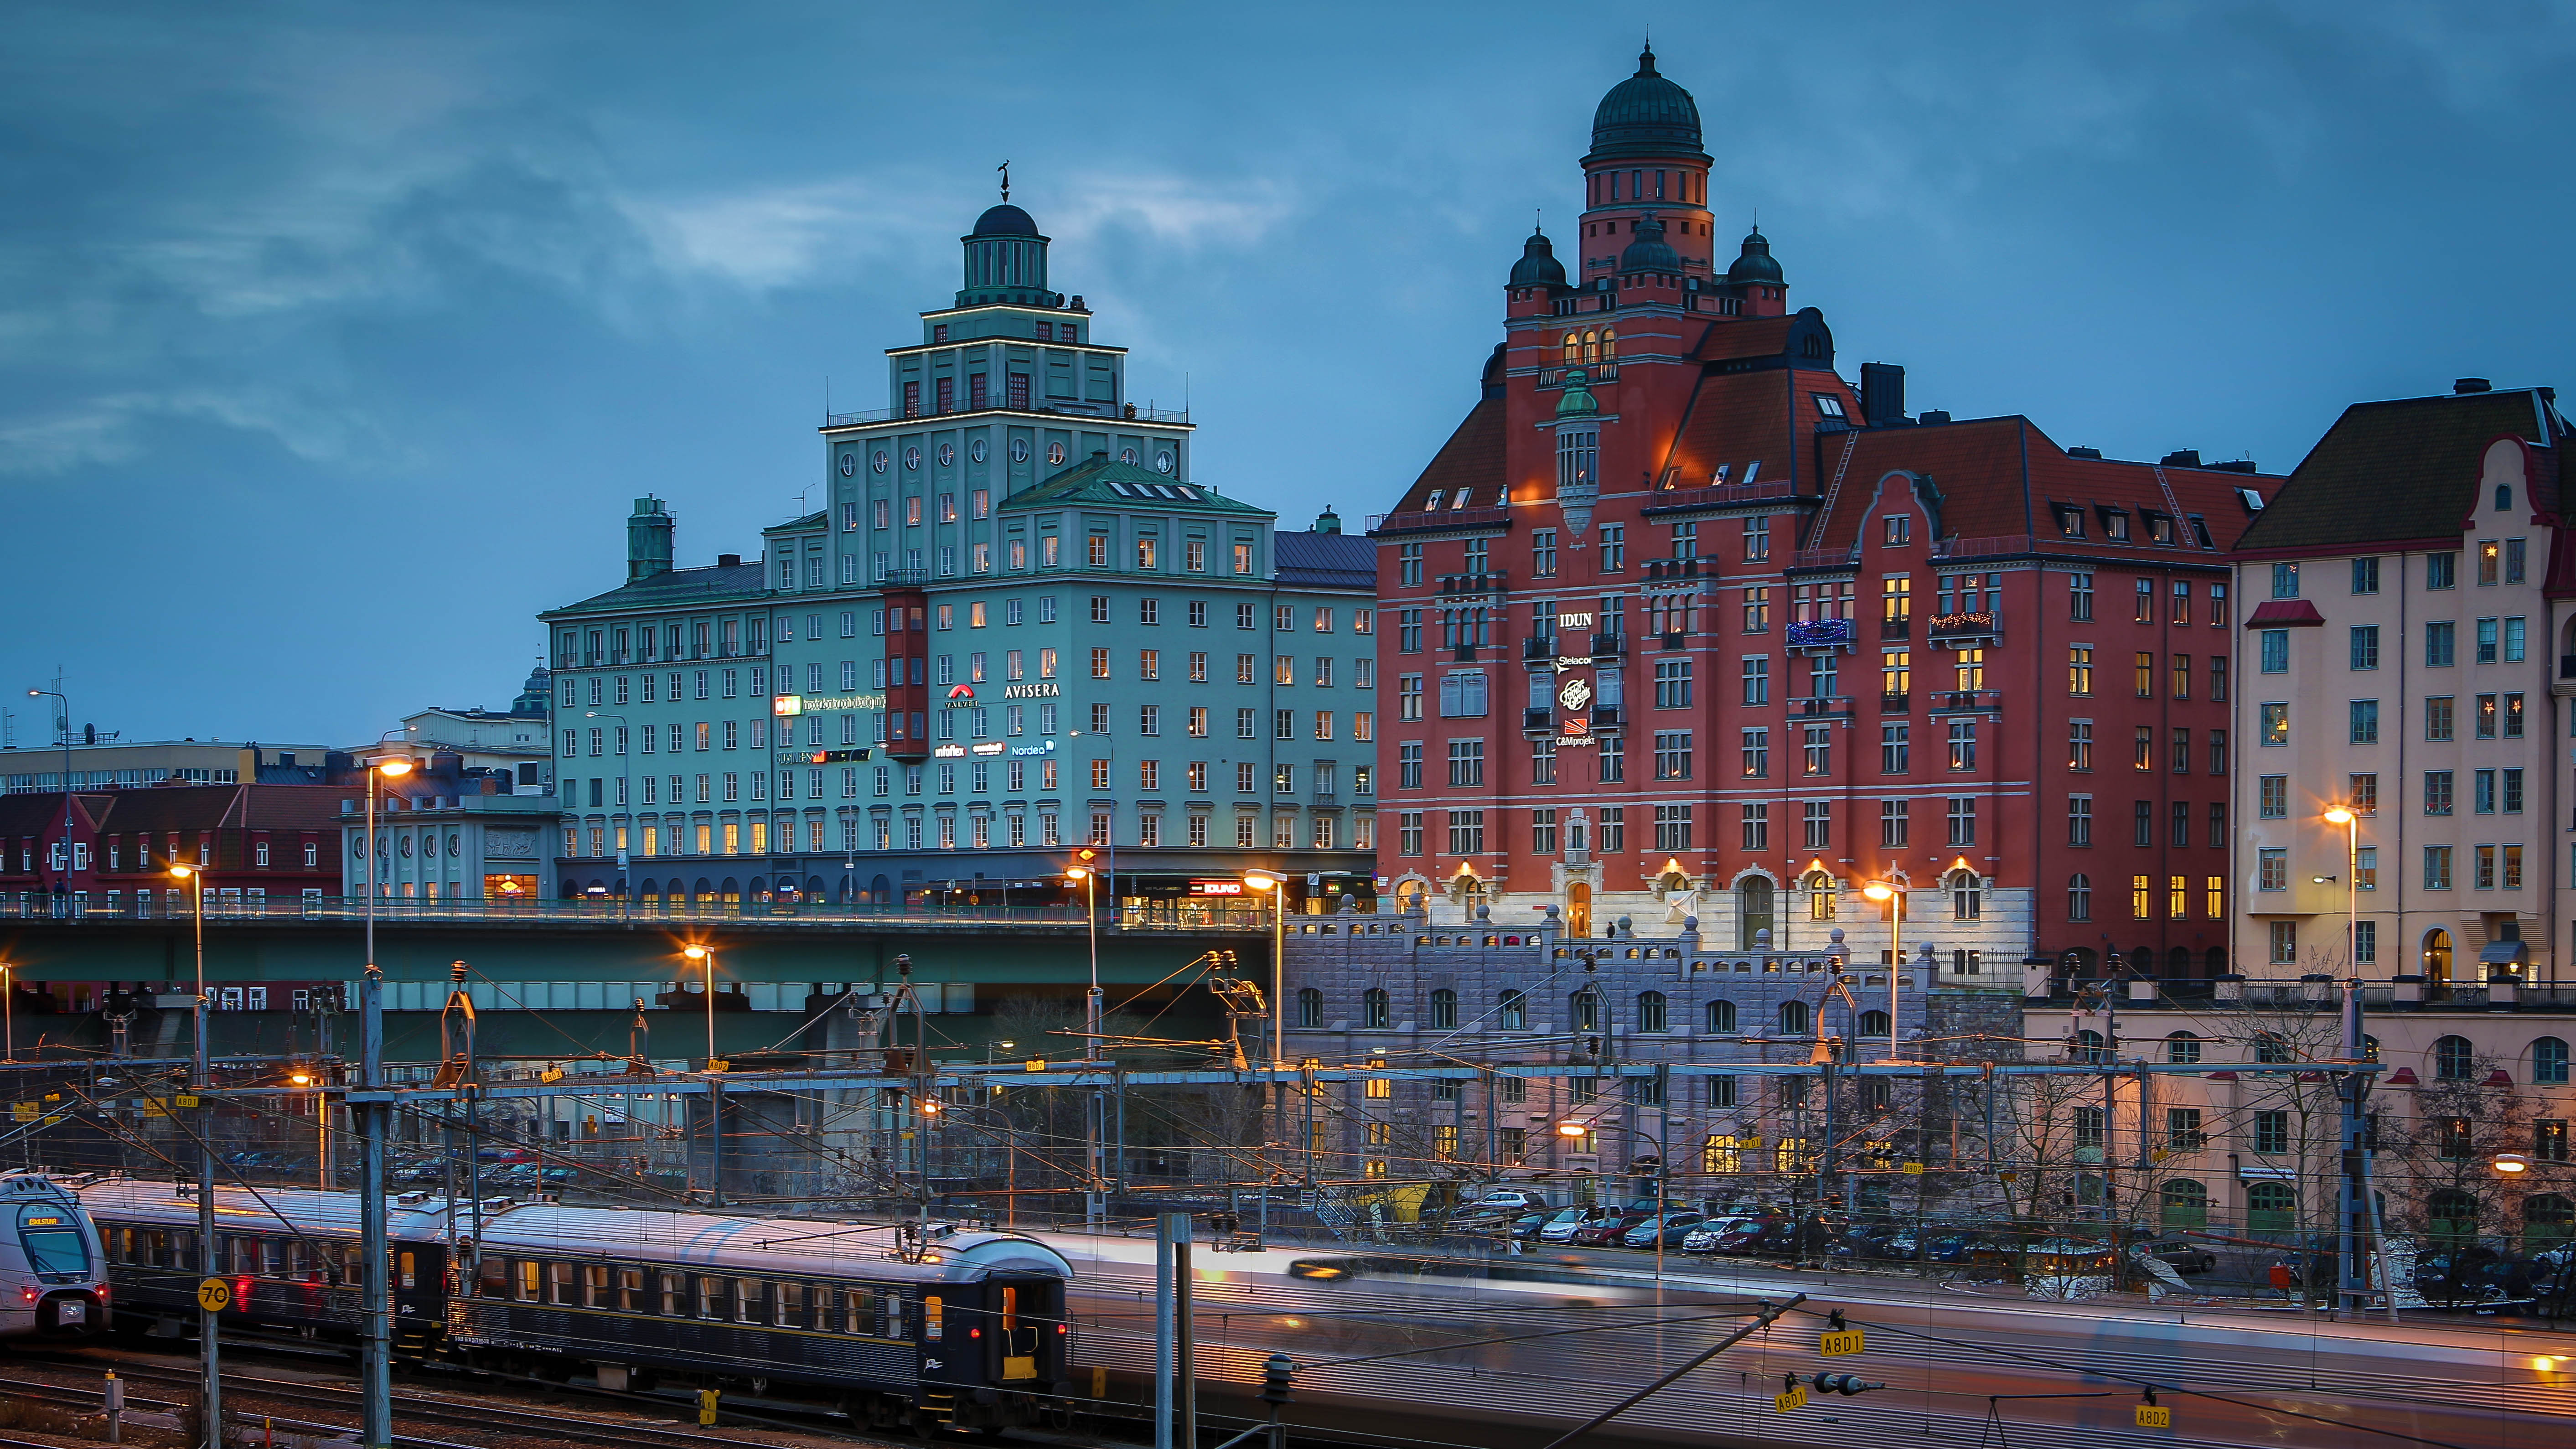 A train station at sunset in Sweden